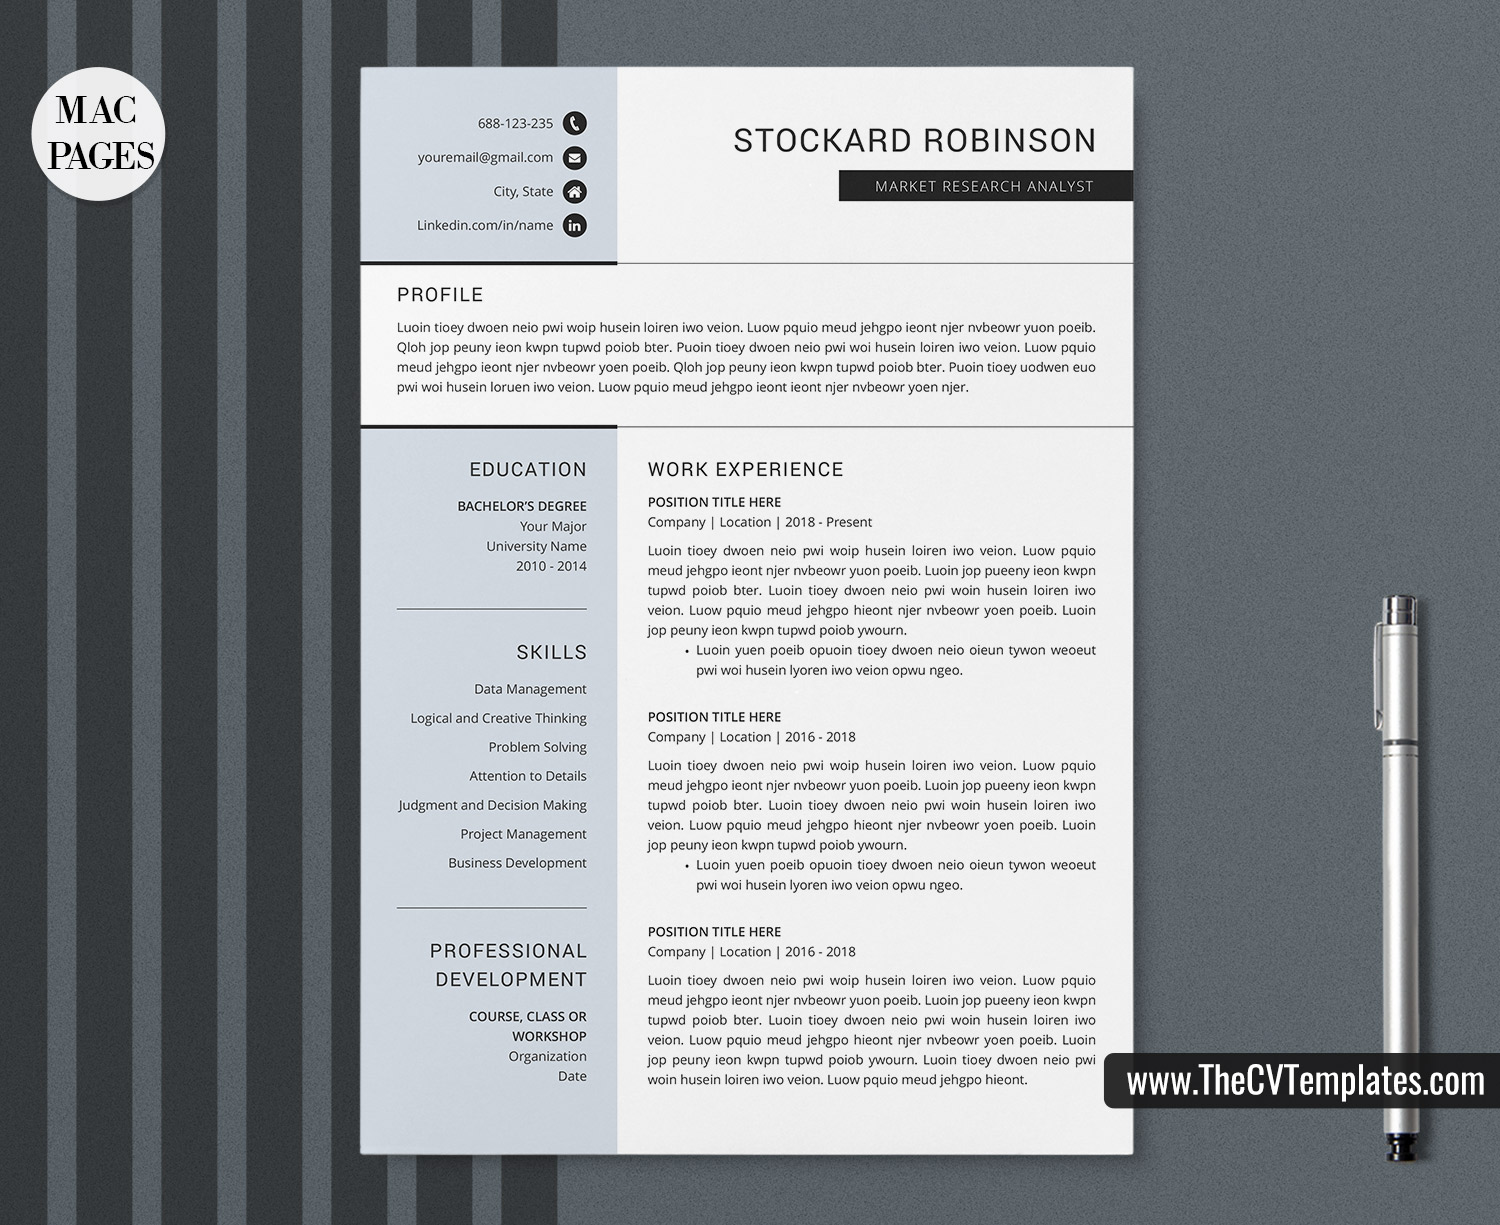 For Mac Pages Simple Cv Template Resume Template Cover Letter Minimalist Resume Design Professional Resume Modern Resume Editable Resume Format Job Resume 1 3 Page Resume Instant Download Thecvtemplates Com